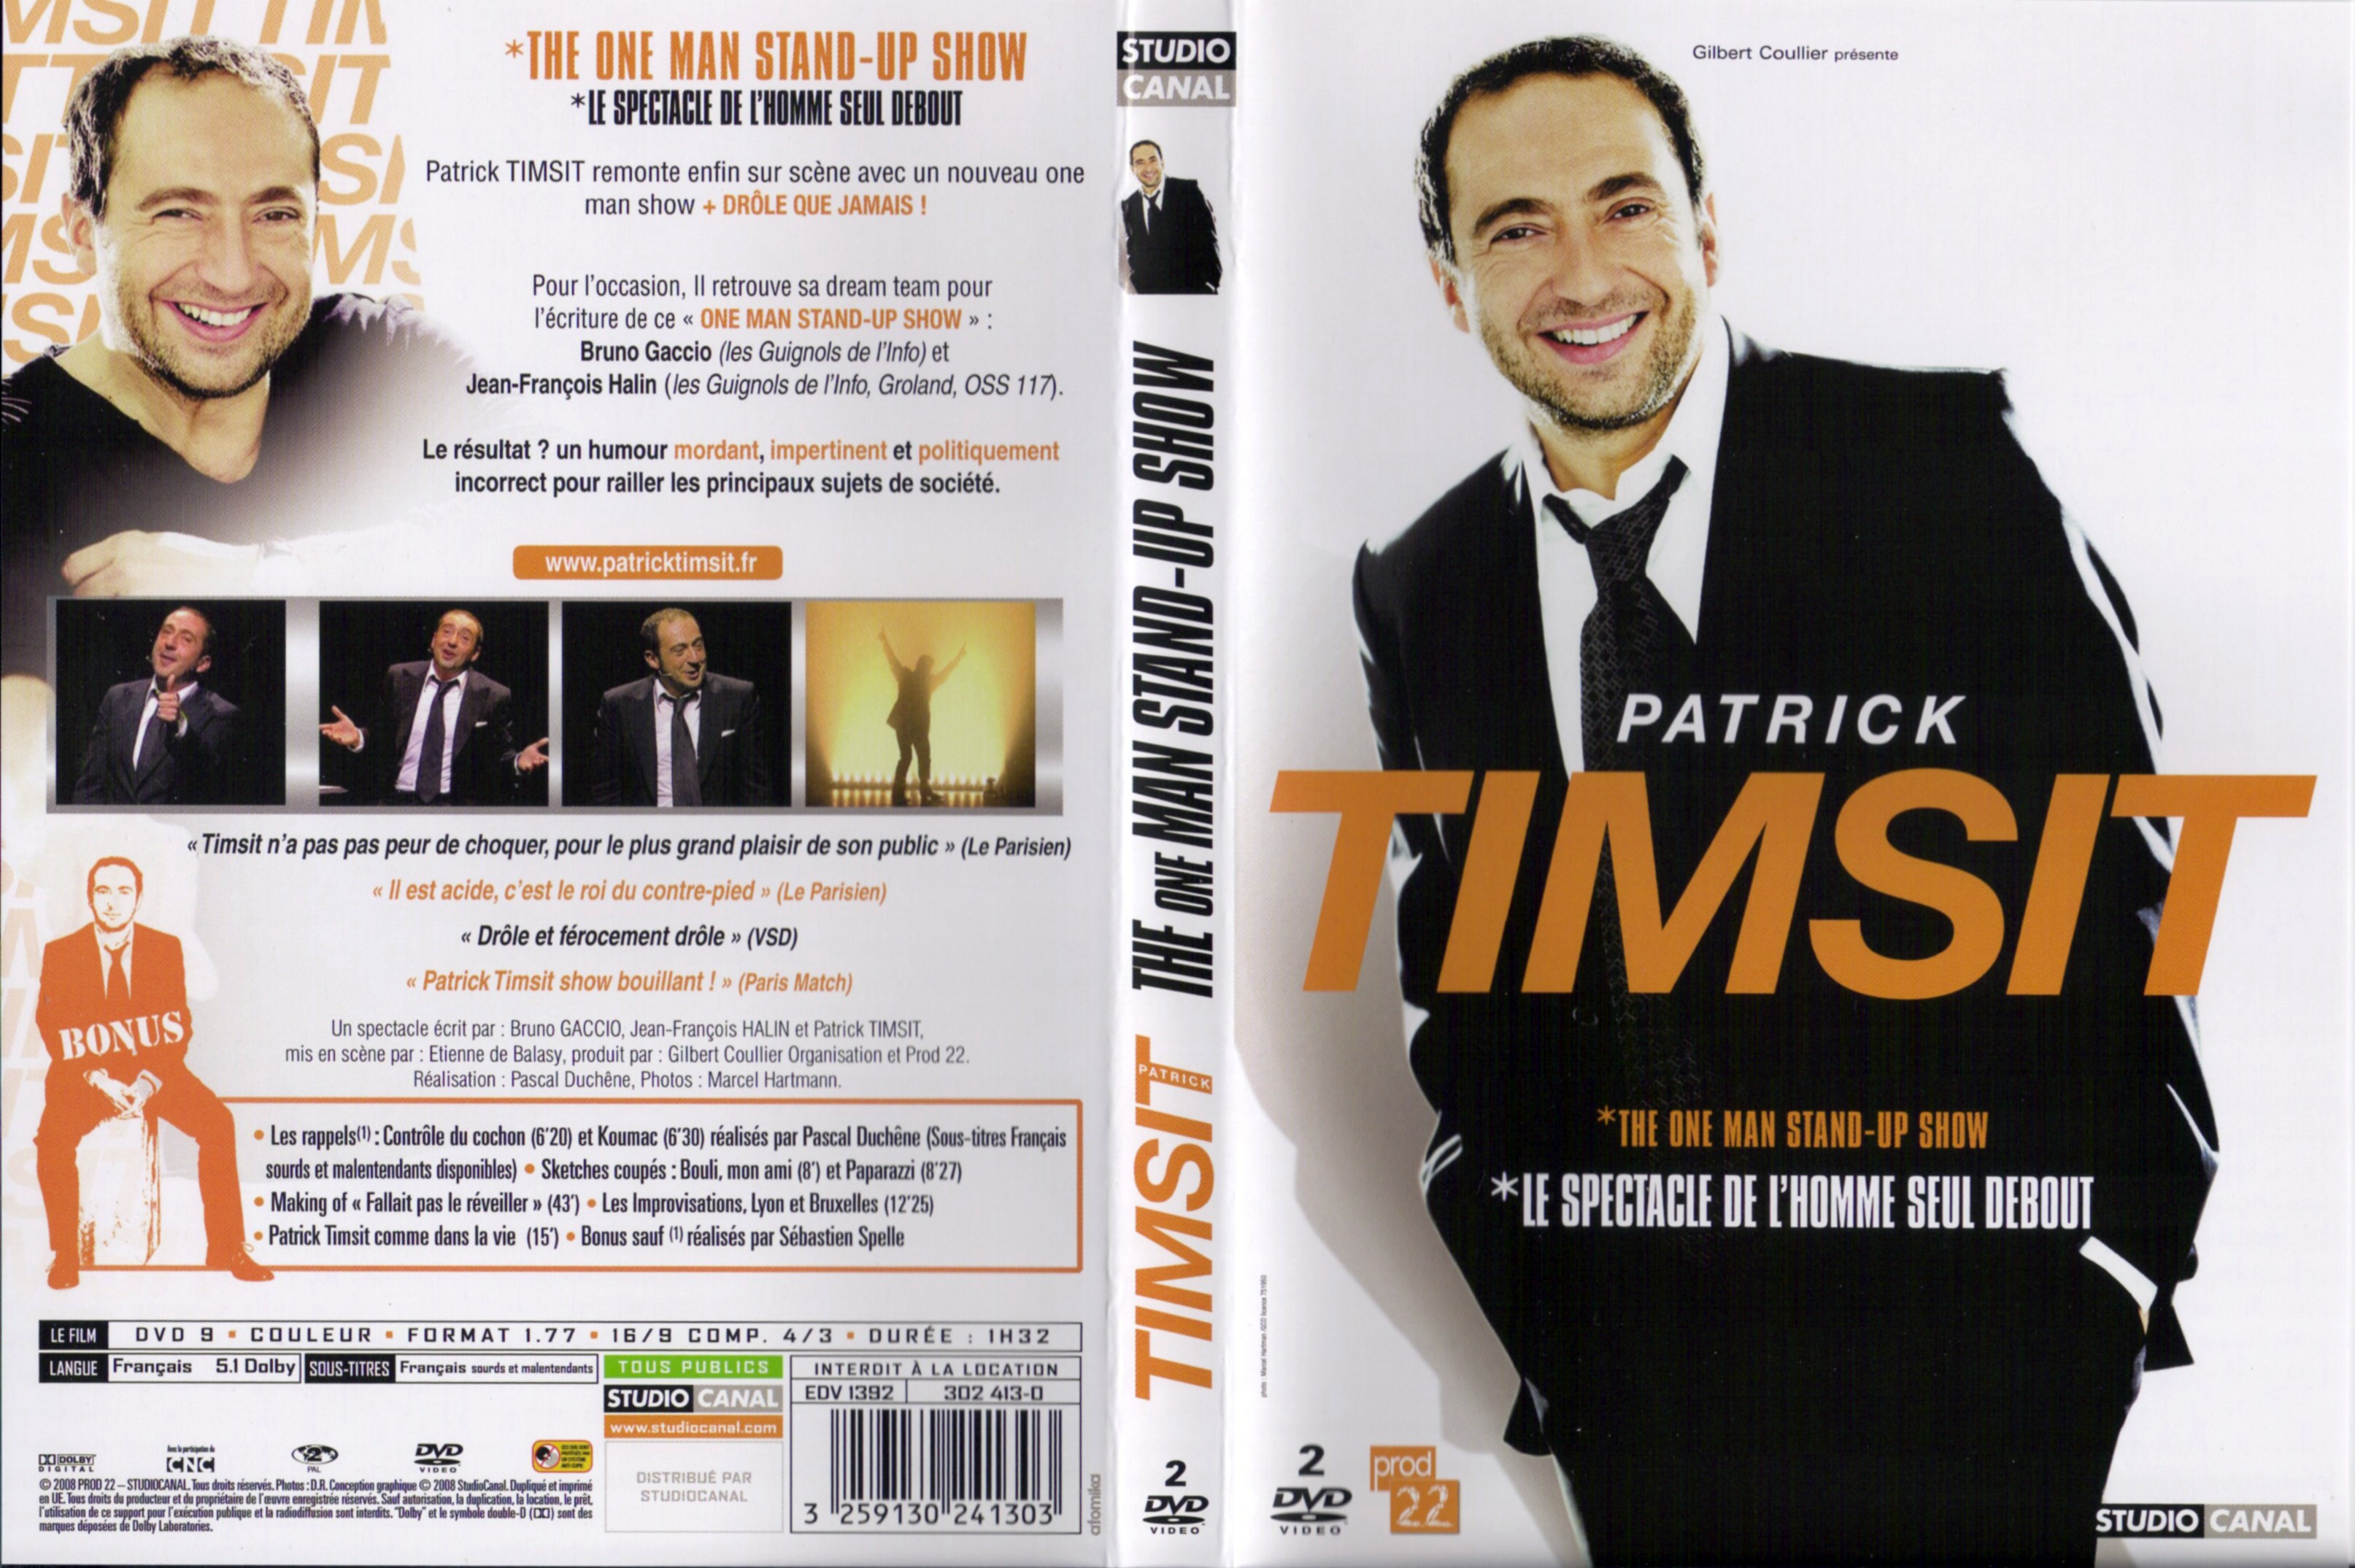 Jaquette DVD Patrick Timsit - The one man stand-up show